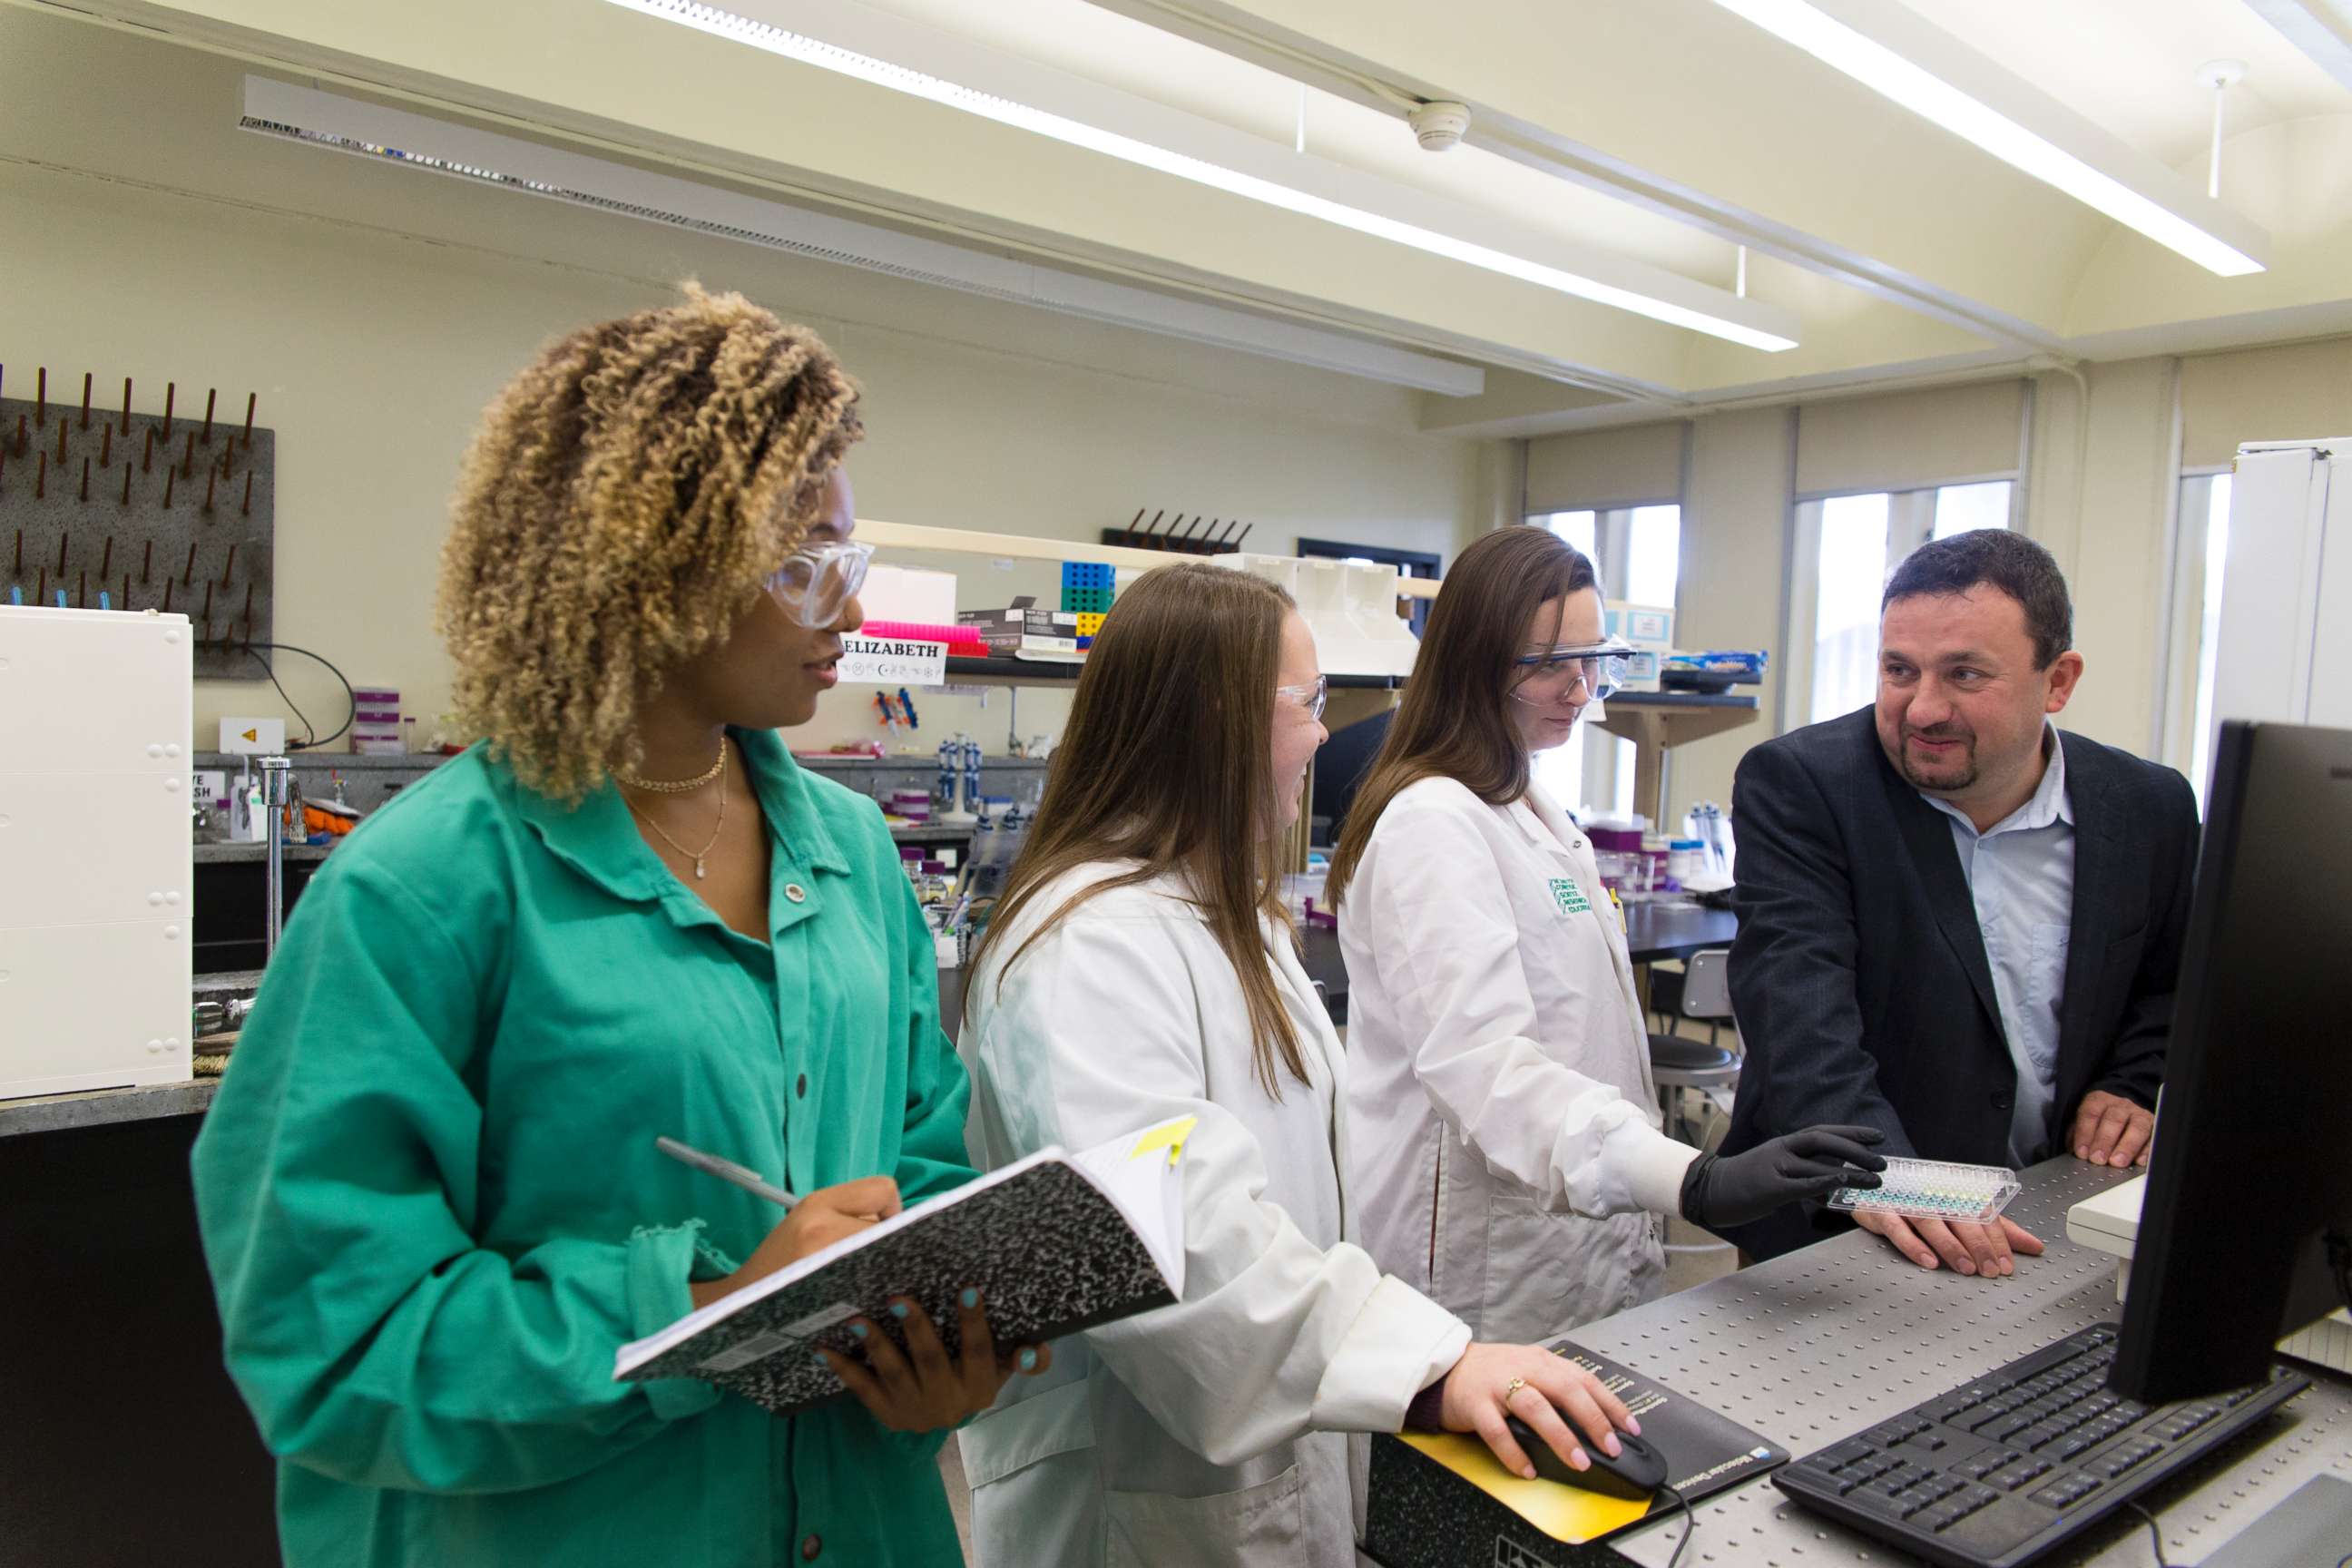 PHOTO: Assistant Professor Jan Halamek, Ph.D, working with Erica Brunelle, 4th year Chemistry PhD candidate; Mindy Hair, 2nd year Chemistry PhD candidate; and Adrianna Mathis '18 Chemistry, Nov. 2, 2017.